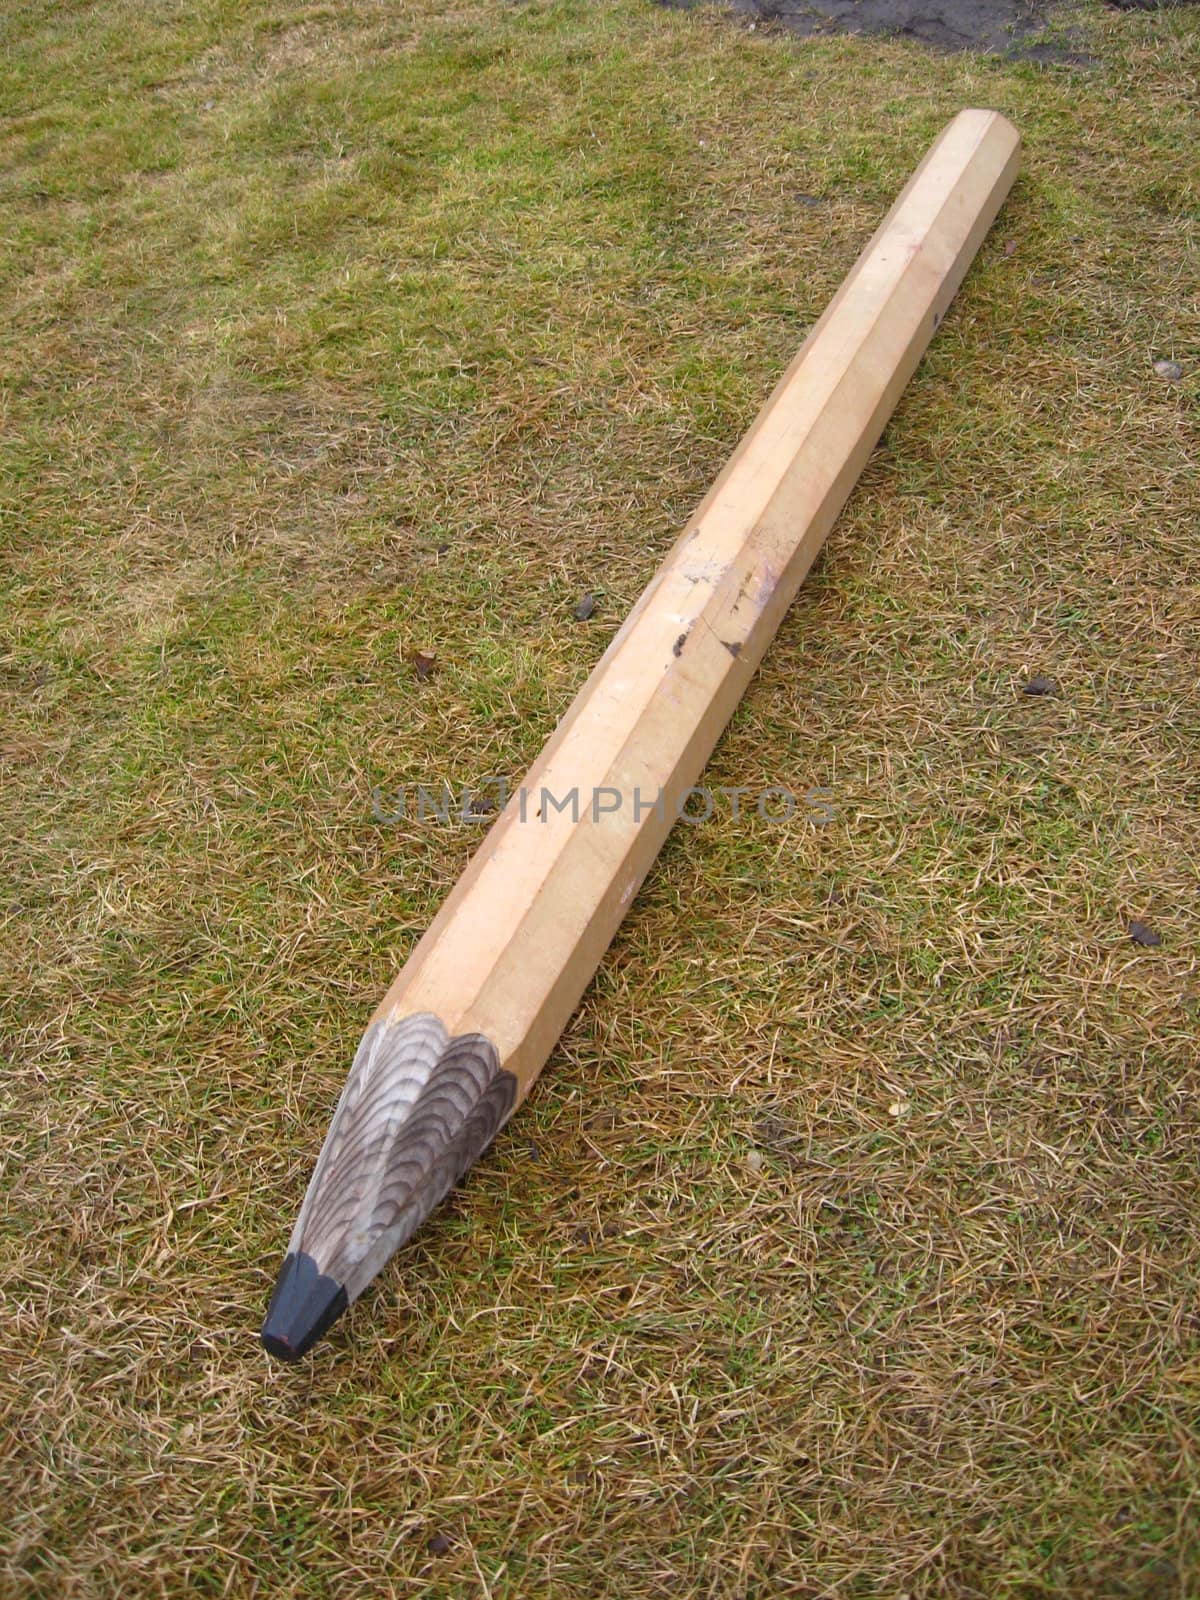 Huge artificial pencil laying on the ground